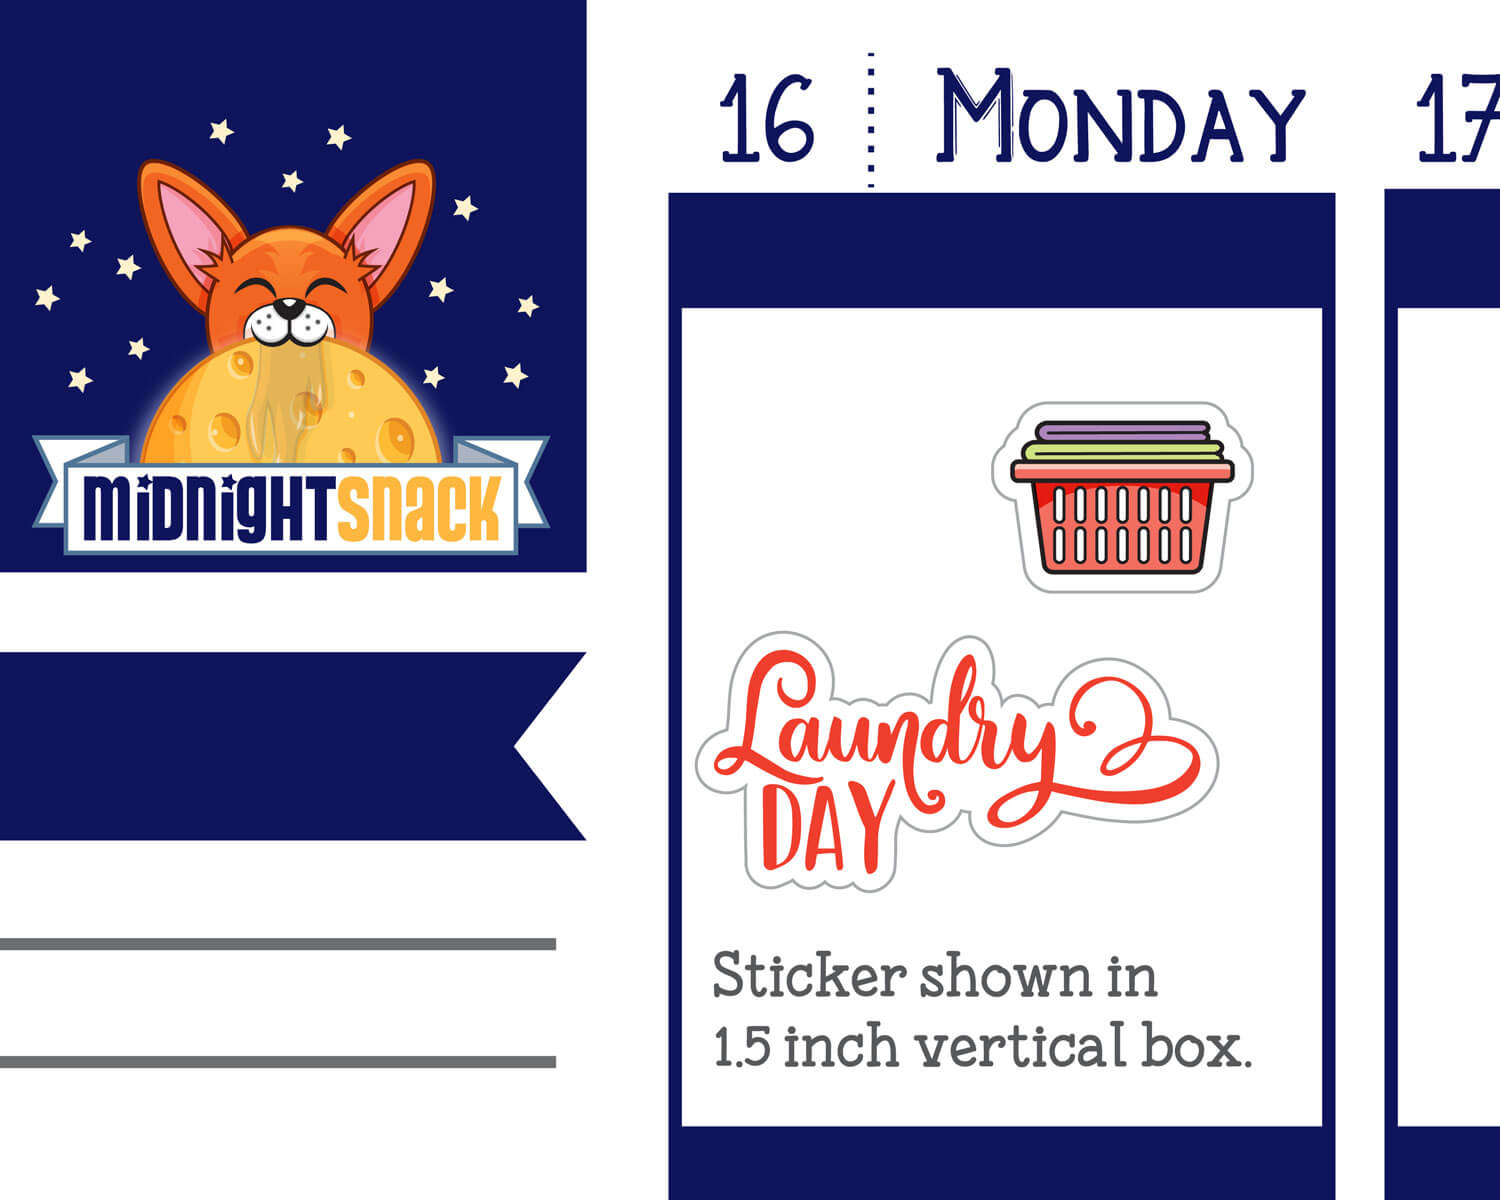 Laundry Day Sampler Planner Stickers from Midnight Snack Planner